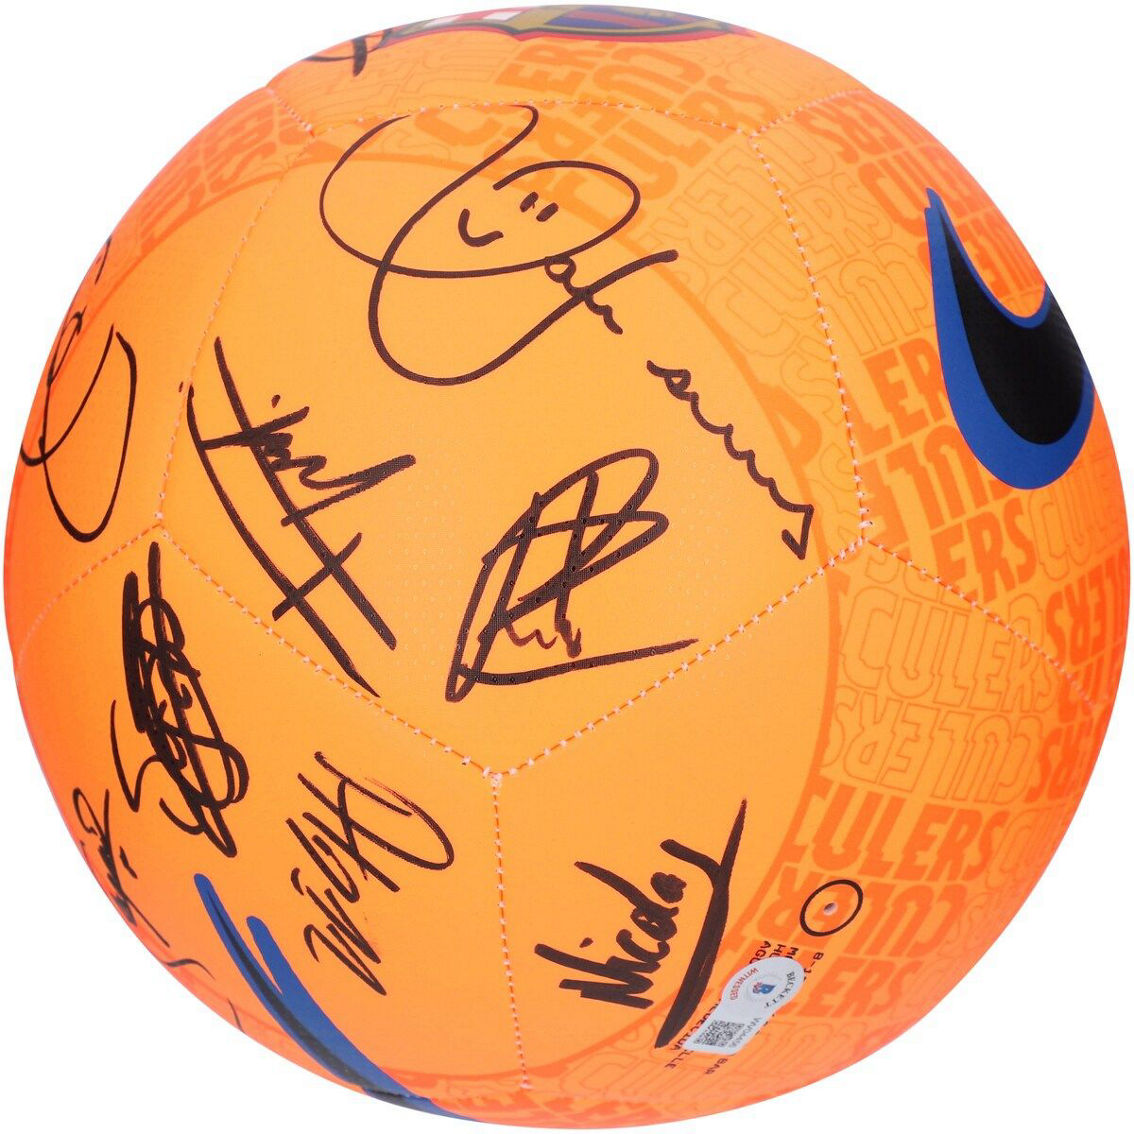 Fanatics Authentic Barcelona Autographed 2021-22 Soccer Ball with Multiple Signatures - Image 4 of 4